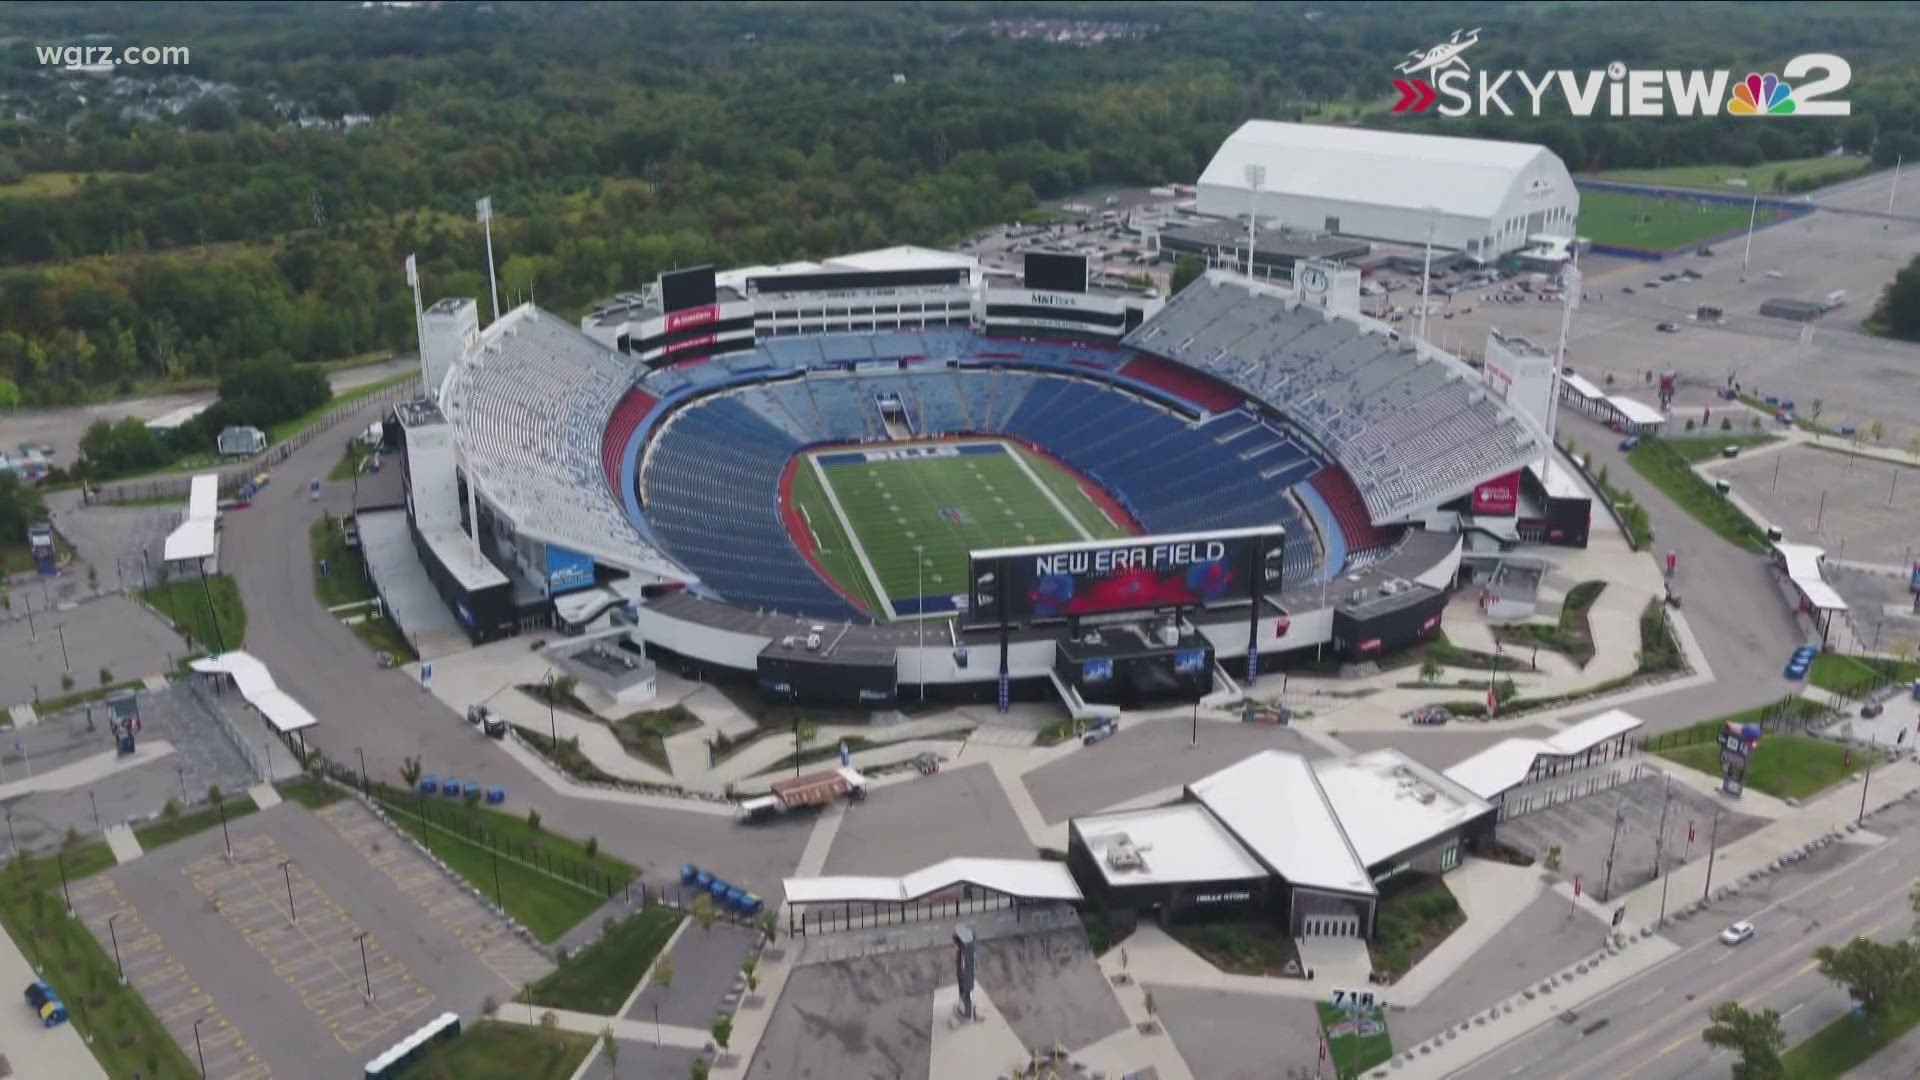 The Buffalo Bills appear to be laying the groundwork for a new stadium in Western New York.